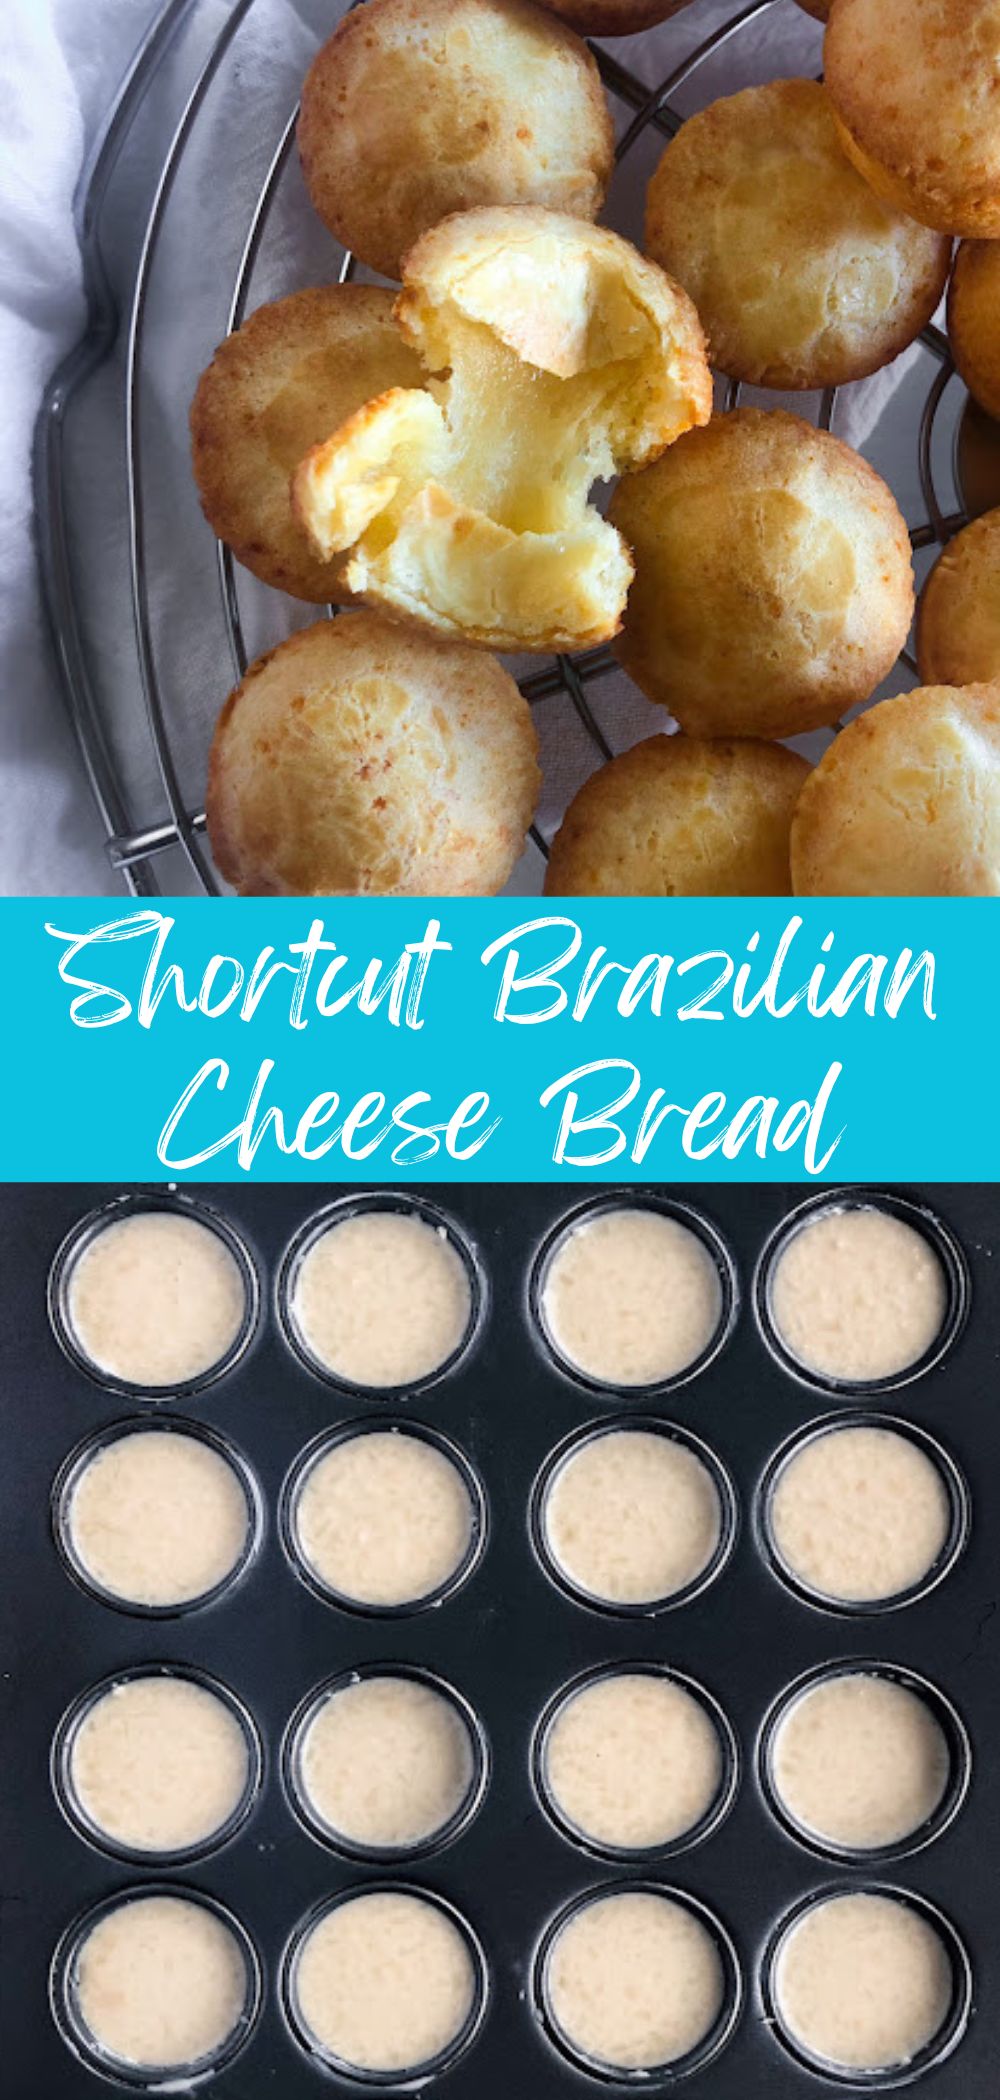 shortcut Brazilian cheese bread on a cooling rack